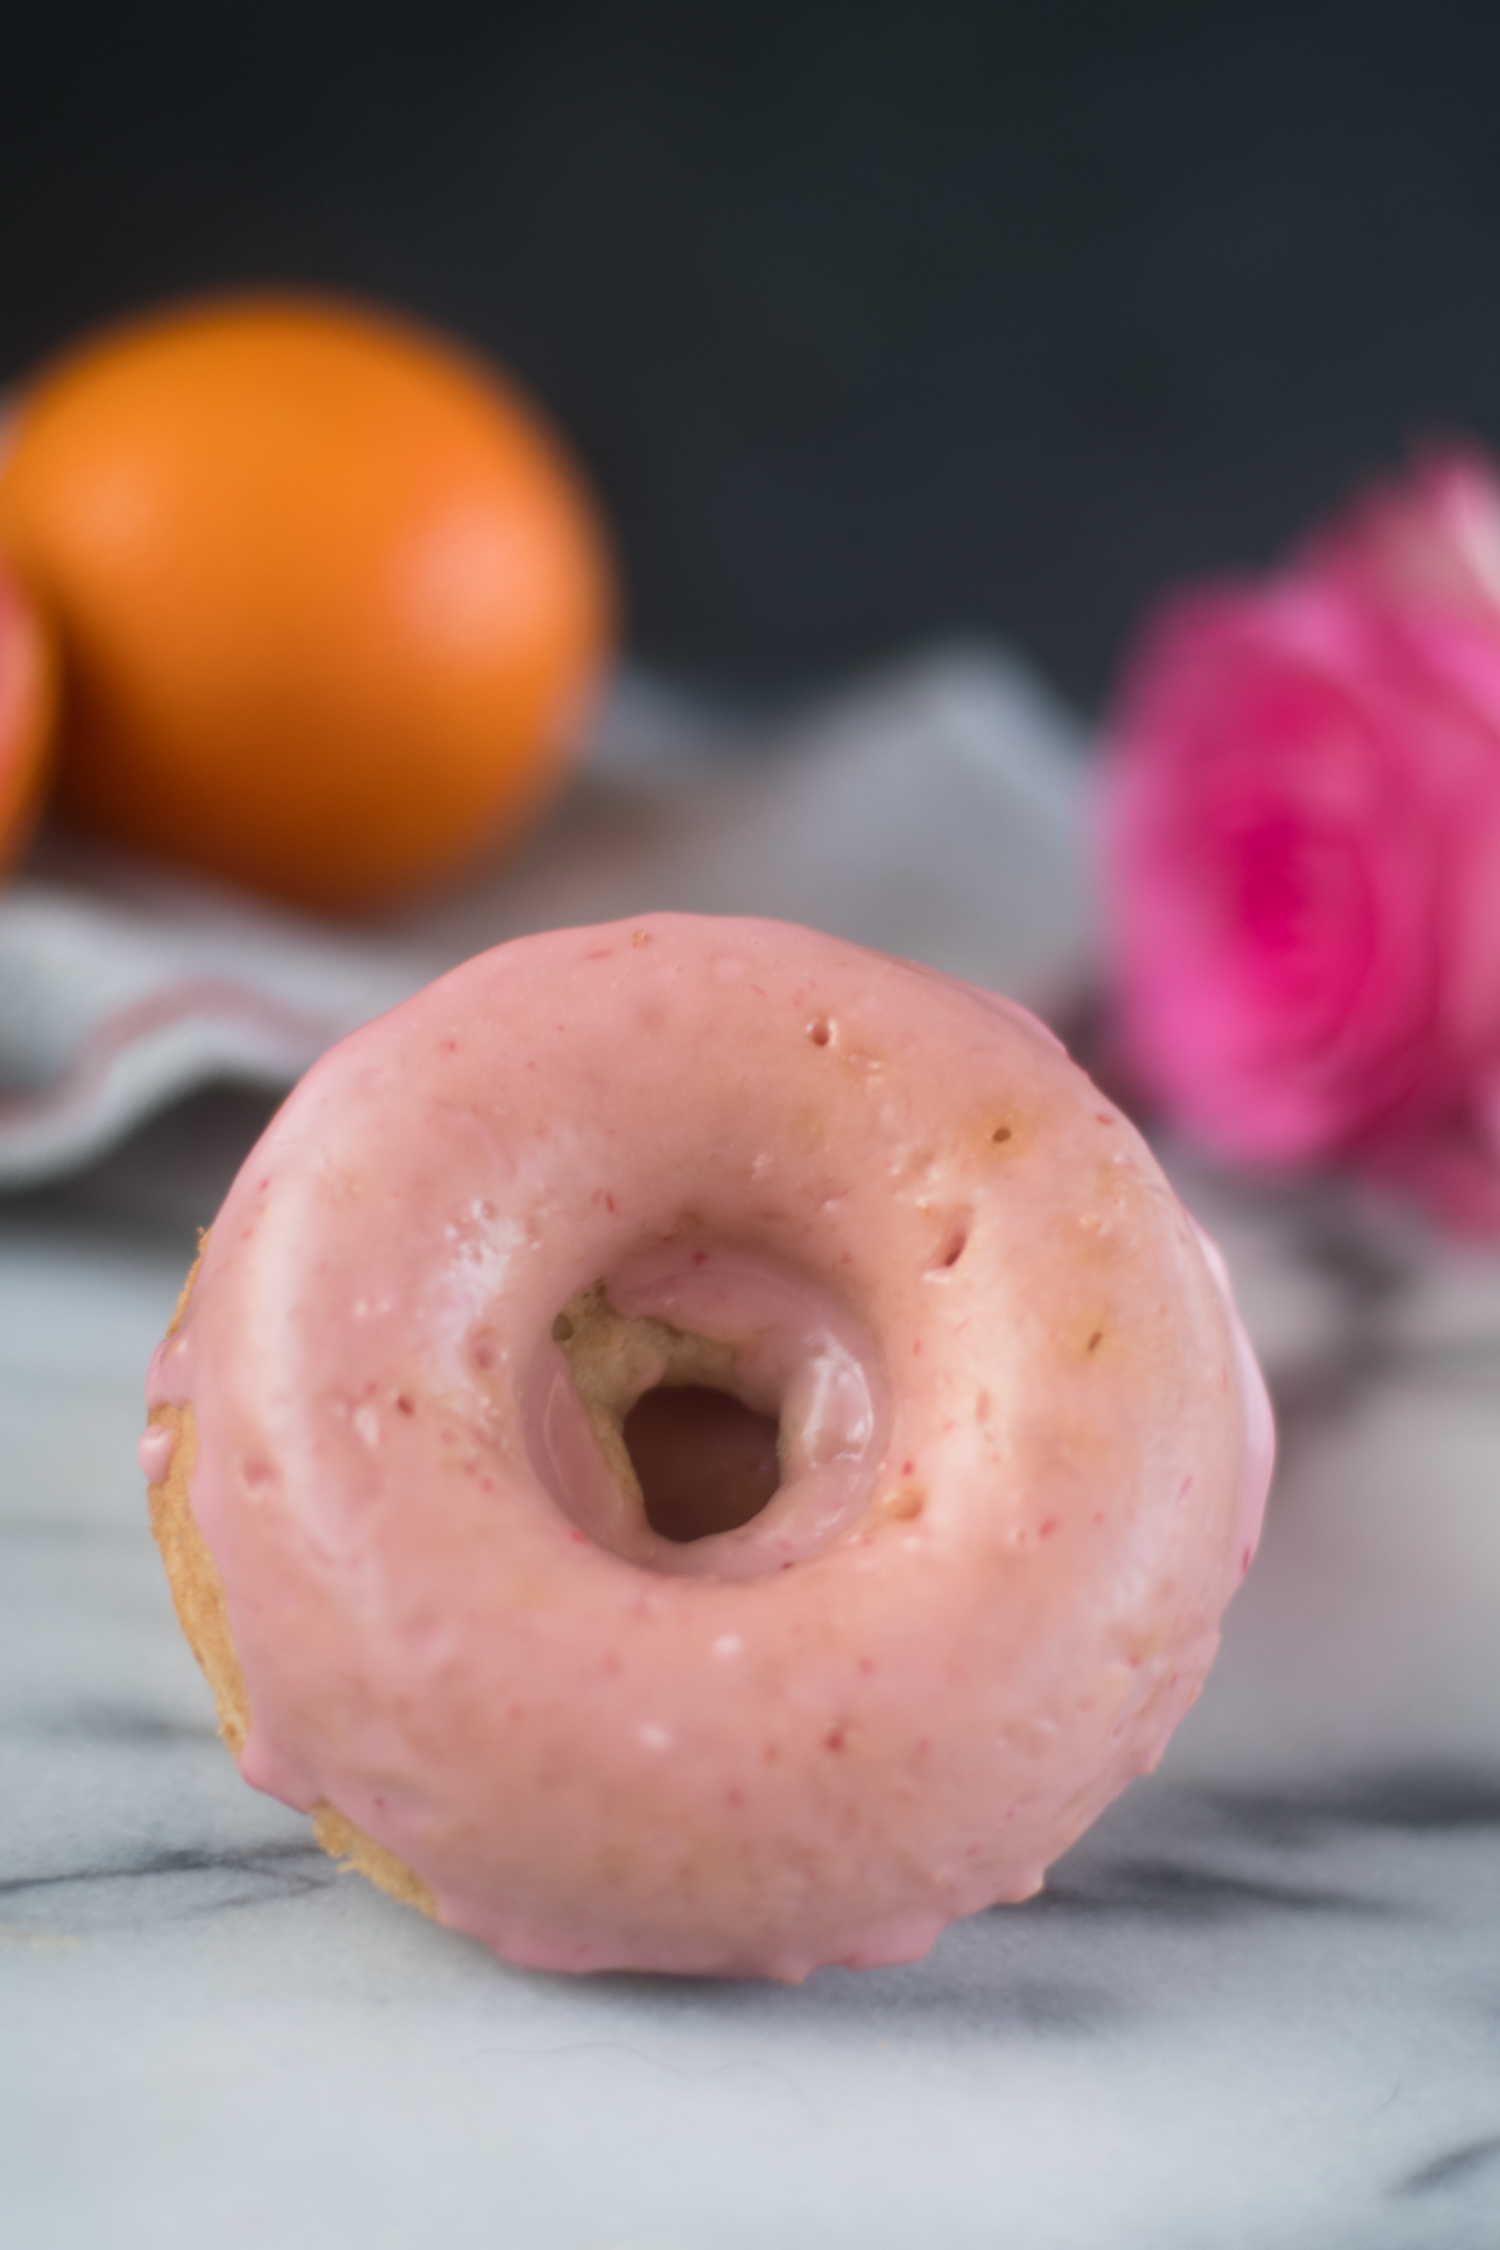 Vegan Blood Orange Donuts topped with a blood orange glaze are perfect for a sweet breakfast treat! #vegan #donuts #recipes #valentines #breakfast